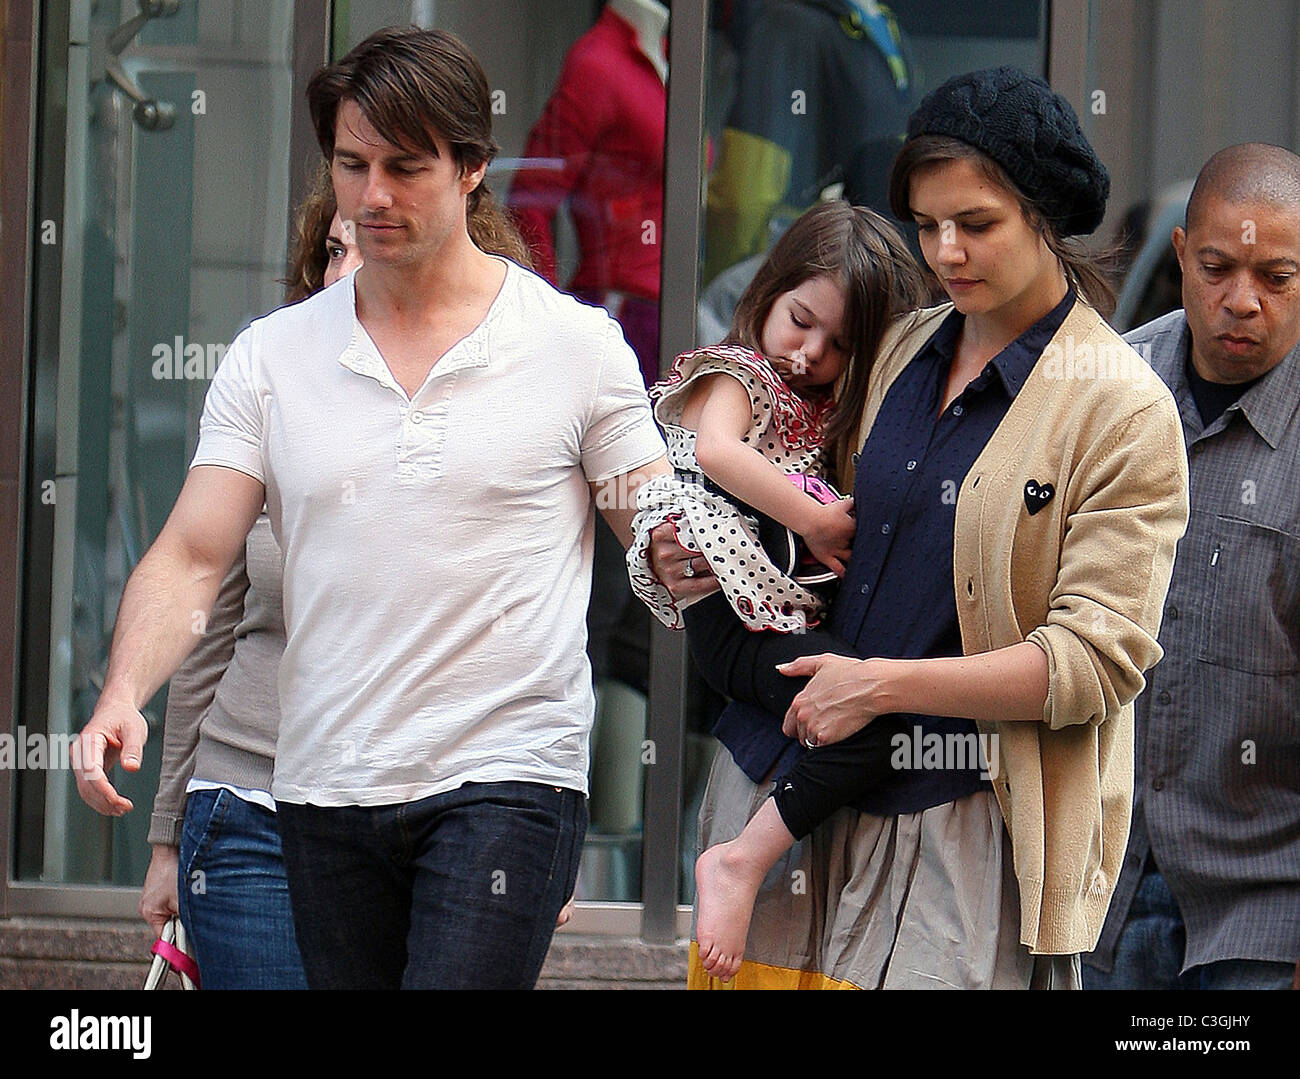 Tom Cruise, Holmes with their daughter Suri leaving Nike store Boston, MA - 04.10.09 Stock - Alamy